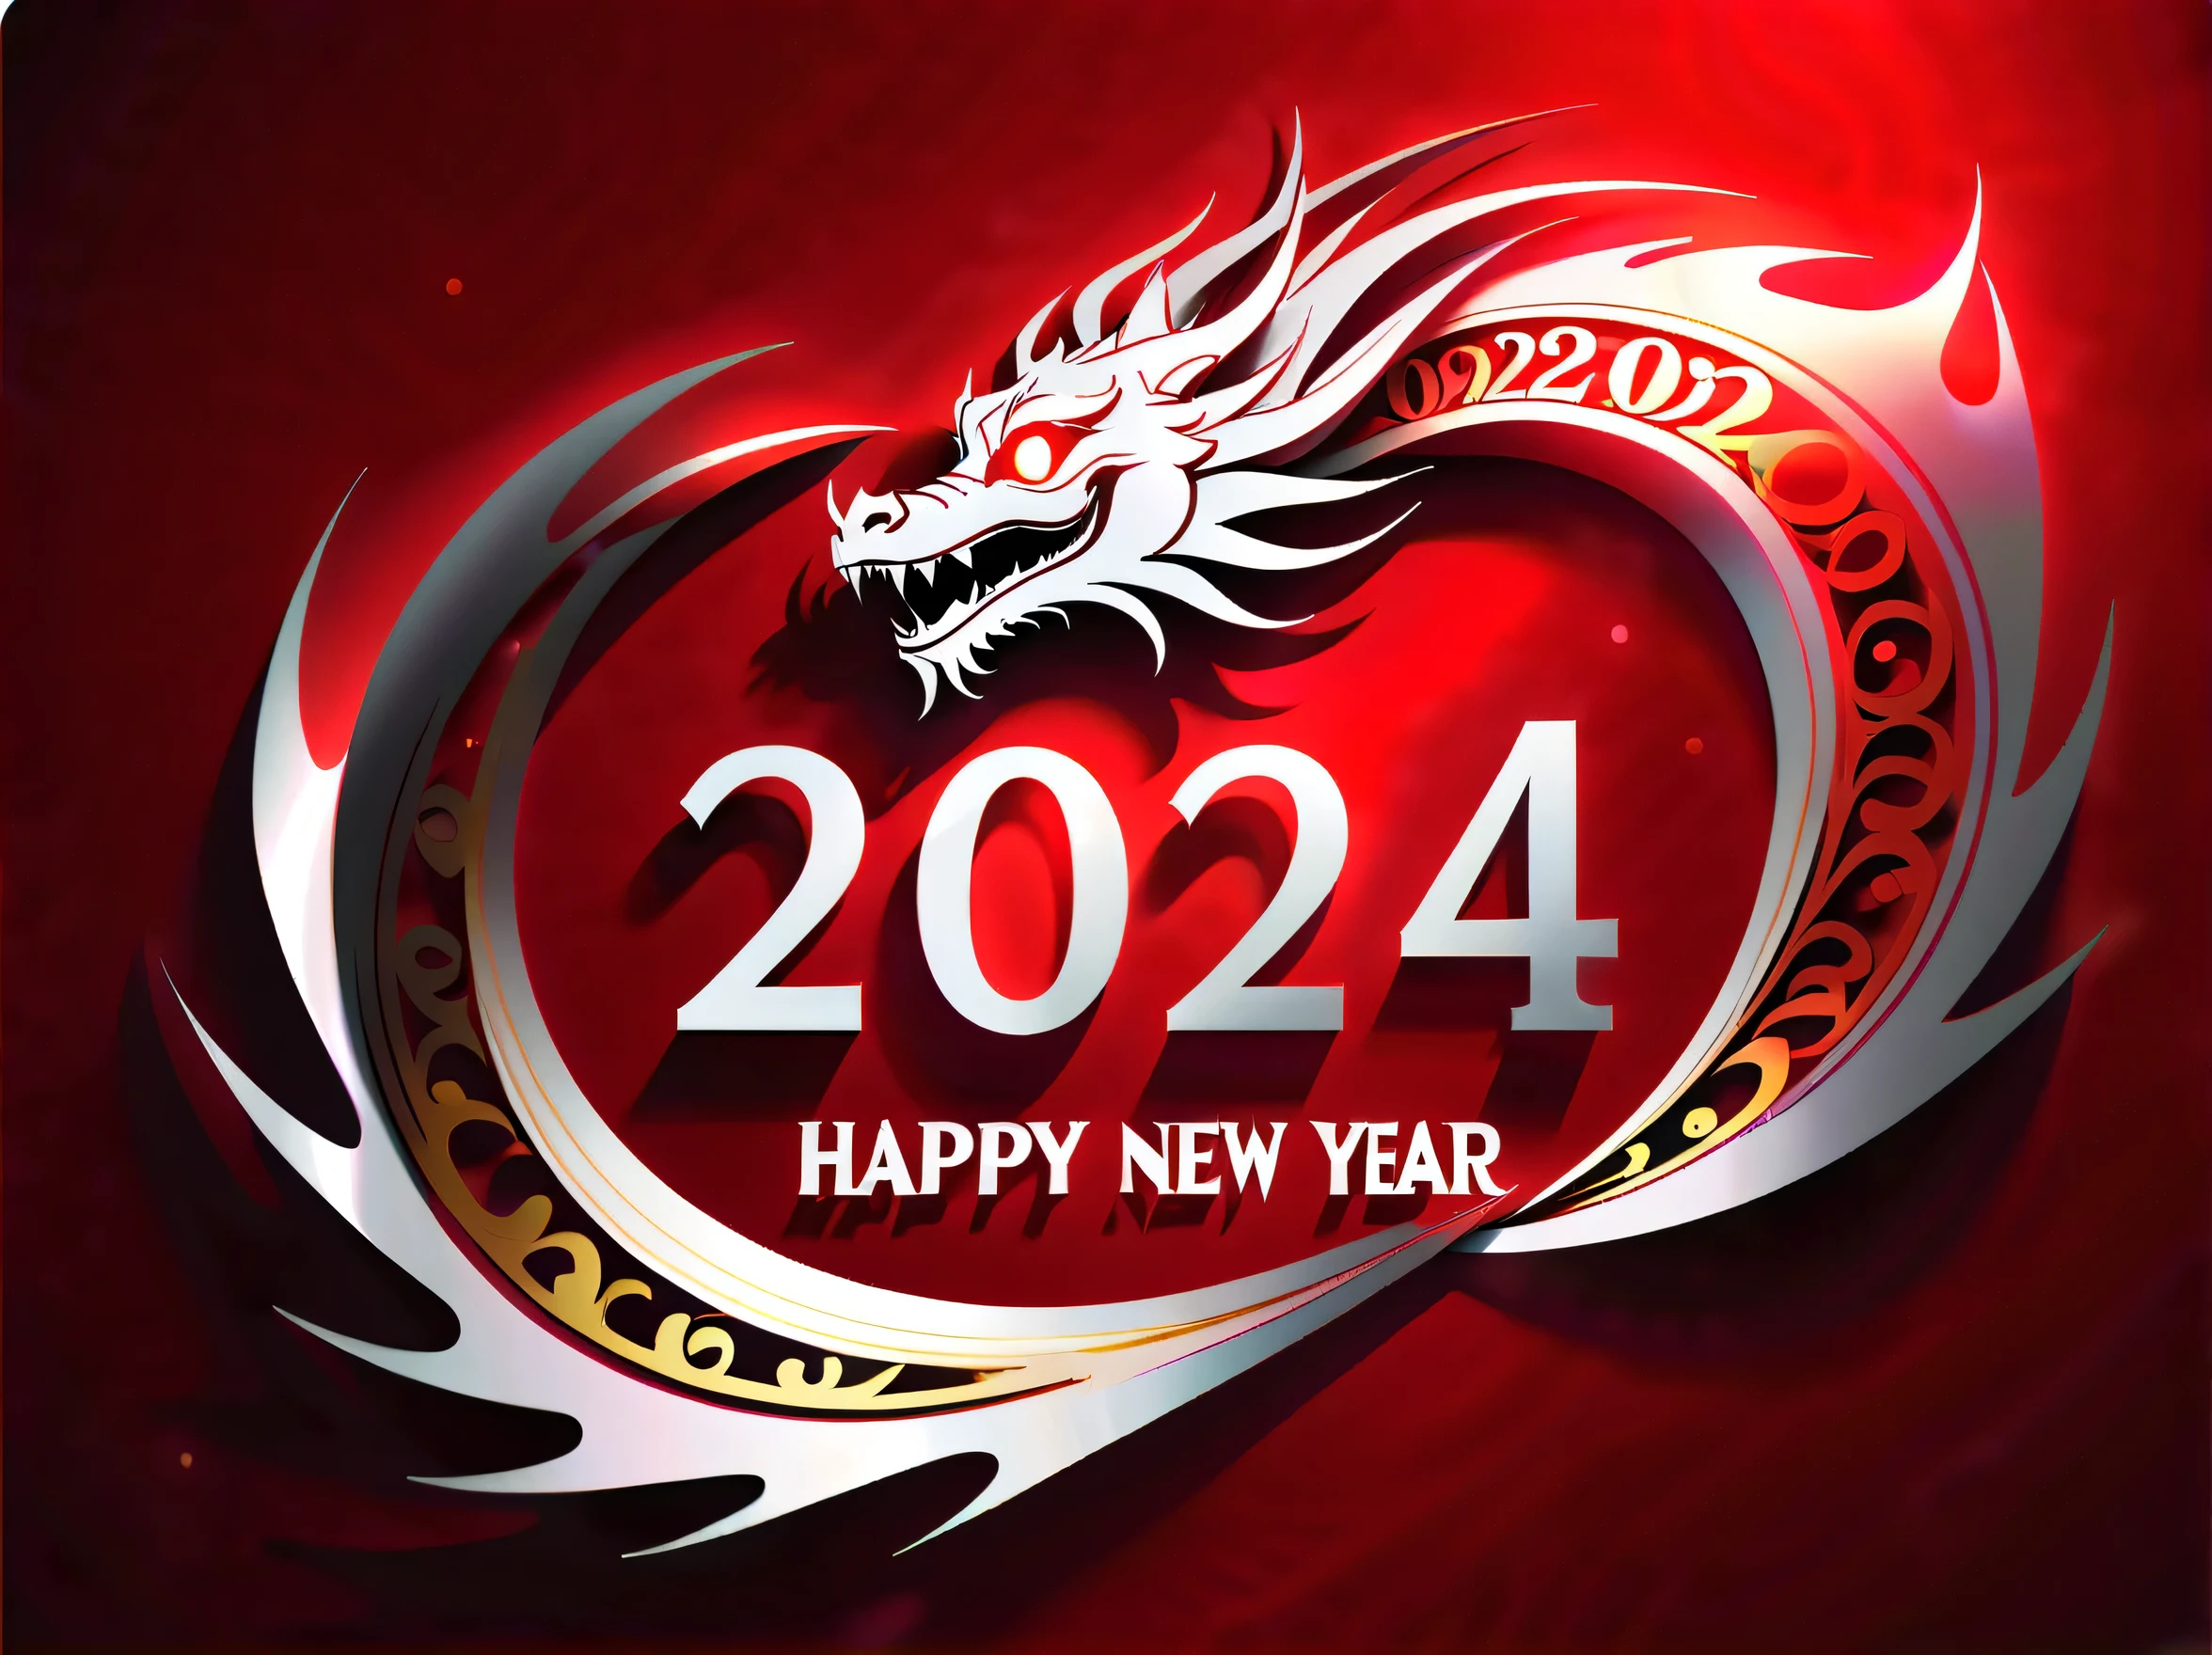 shadow dragon, defeat, dark fantasy atmosphere, Sophisticated, (((The word "Happy New Year 2024":1.4)))), (((White glow metal scroll on red background:1.3))), Unparalleled sharpness and clarity, (((Radiosity rendered in stunning 32K resolution:1.3))), All captured with sharp focus, Highest Quality, hightquality, Best Quality, 最hightqualityの, absurd detail rendering, Glowing fog, screaming expression, snowy sky all day, The crazy beauty of dark fantasy, hightqualityな, Tonal contrast, intricate detailes, Detailed, Texture, High resolution, (((shadow detail coating:1.1))), Colorful splashes,